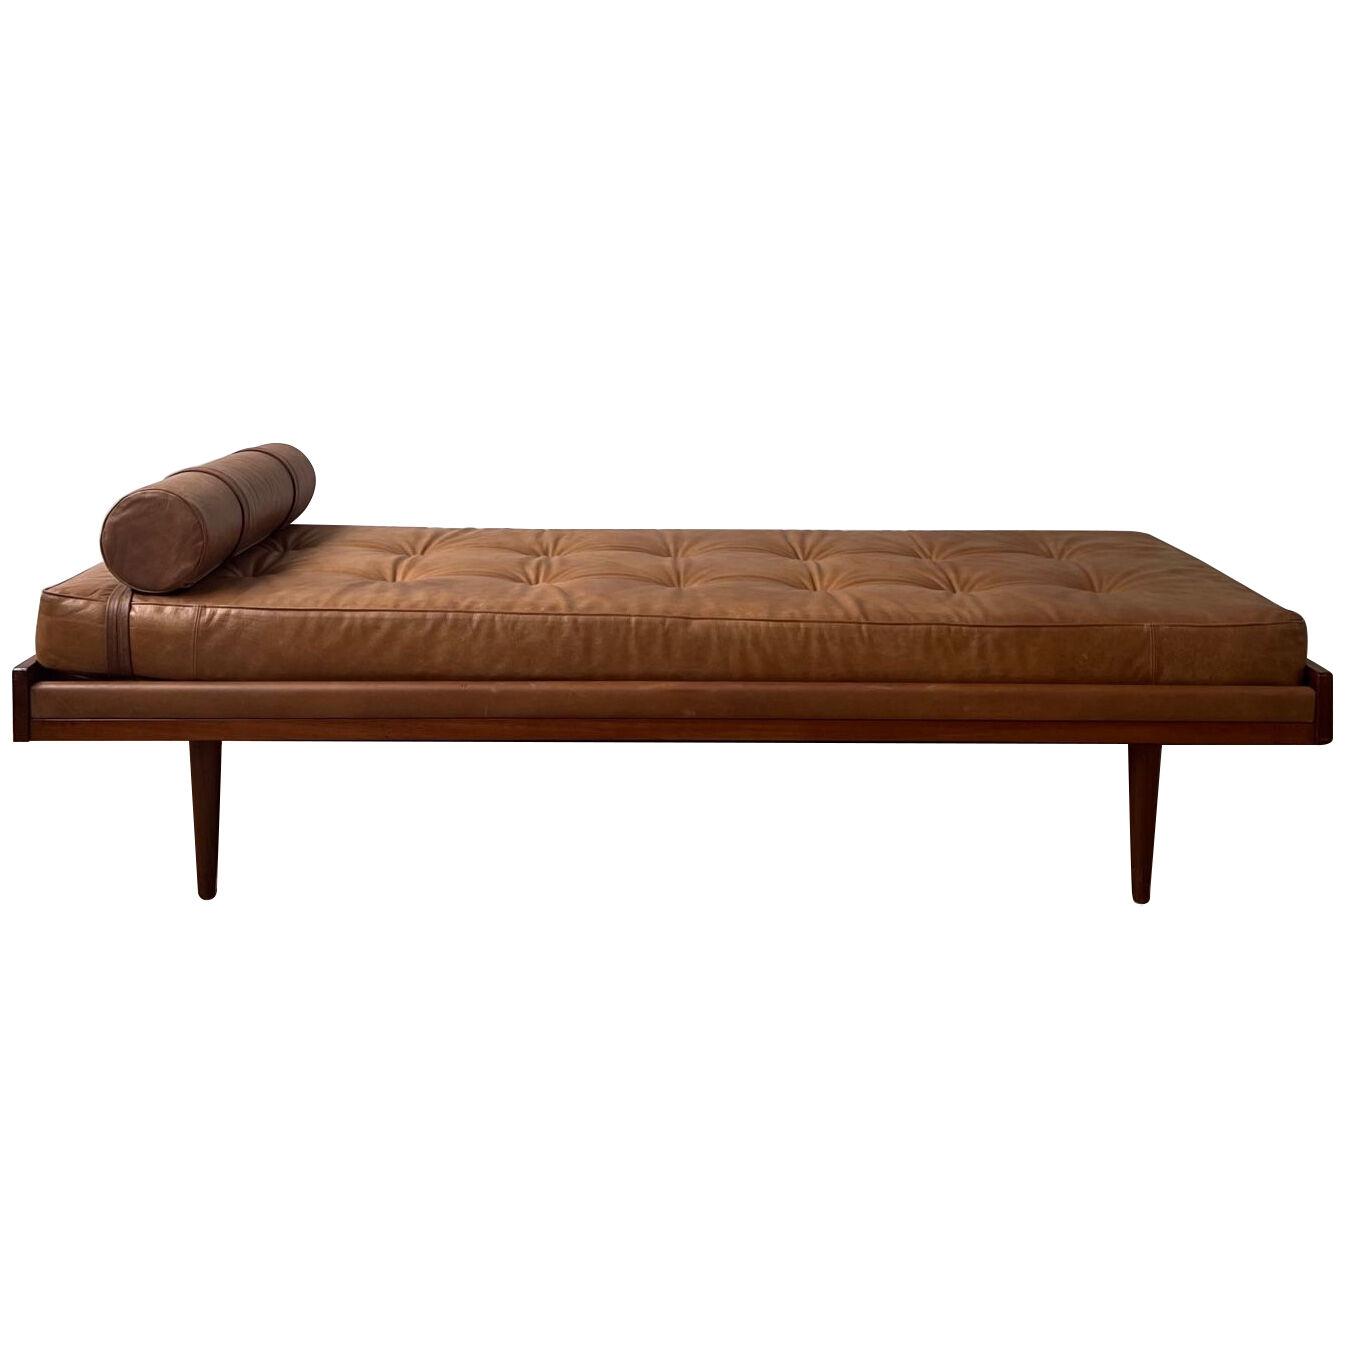 Danish Mid-Century Teak and Leather Day Bed